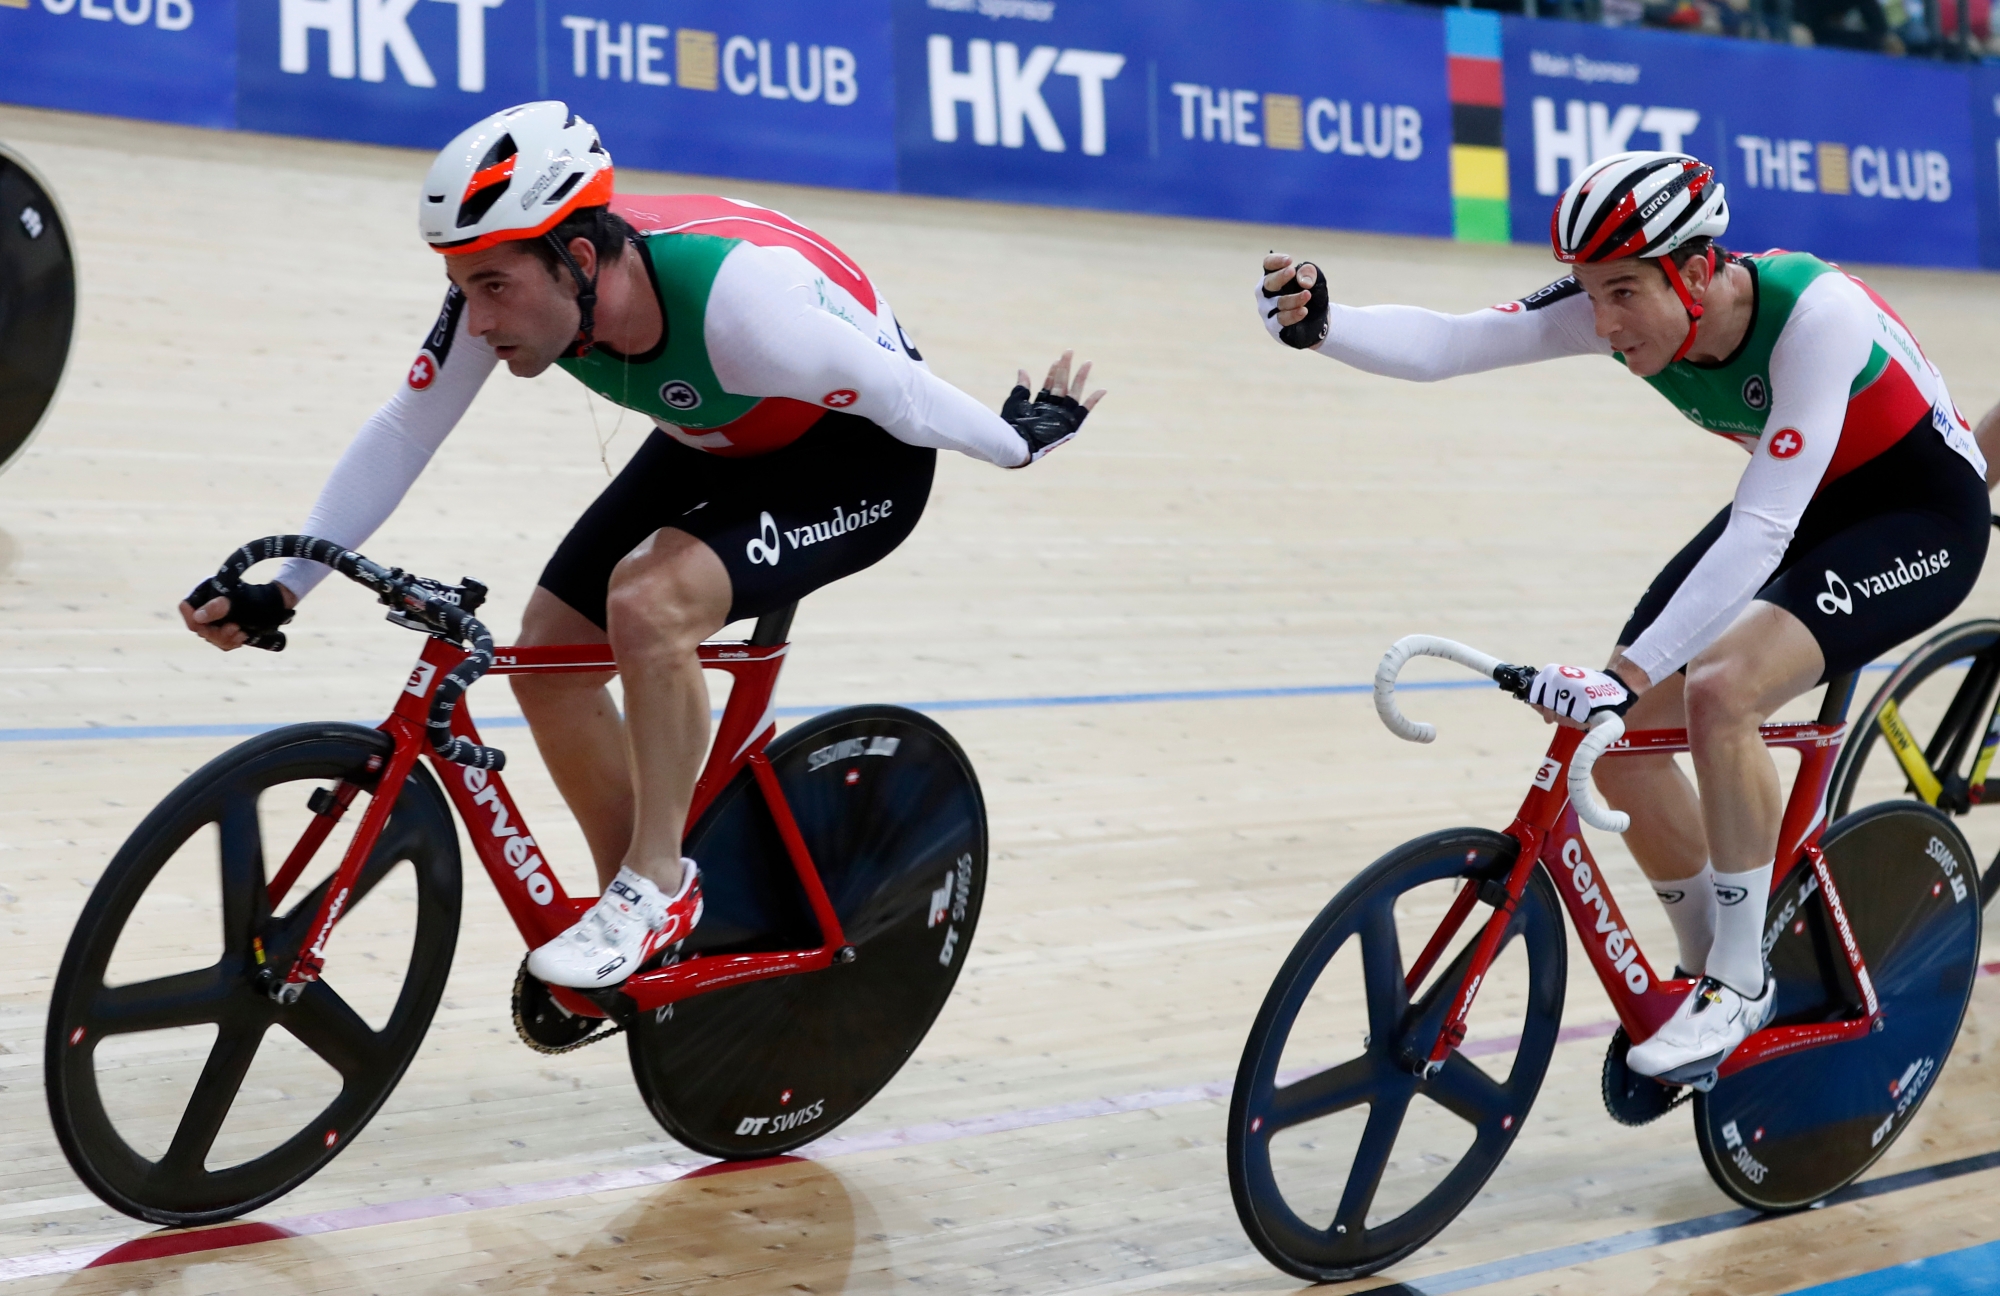 Switzerland's Tristan Marguet and Claudio Imhof tag during the men's madison final at the World Track Cycling championships in Hong Kong, Sunday, April 16, 2017. (AP Photo/Kin Cheung)marguet HONG KONG WORLD TRACK CYCLING CHAMPIONSHIPS